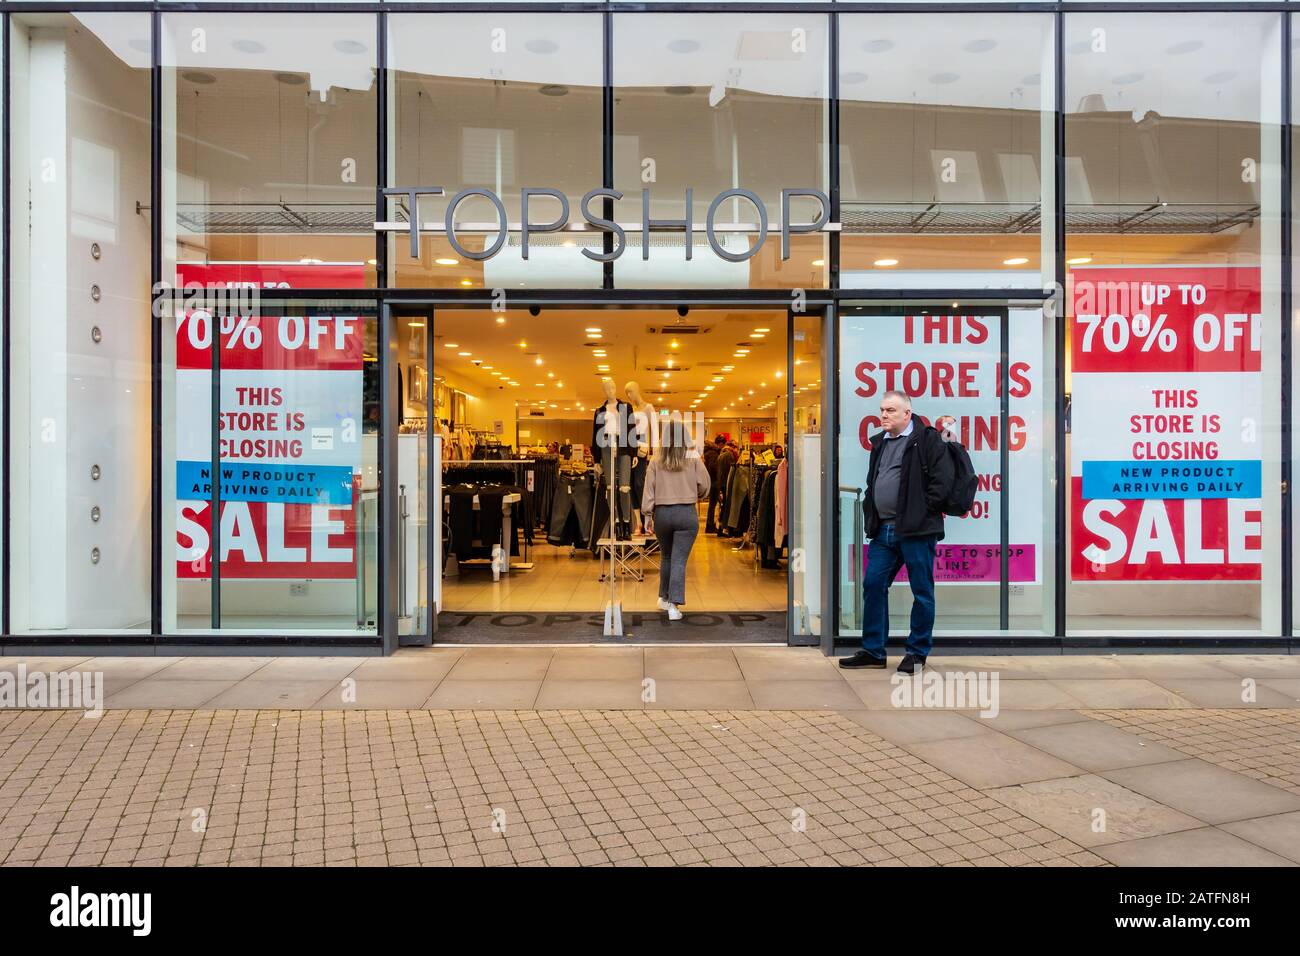 Windsor, UK - February 2 2020: The Topshop store in Windsor is having a  closing down sale as the store is to close Stock Photo - Alamy